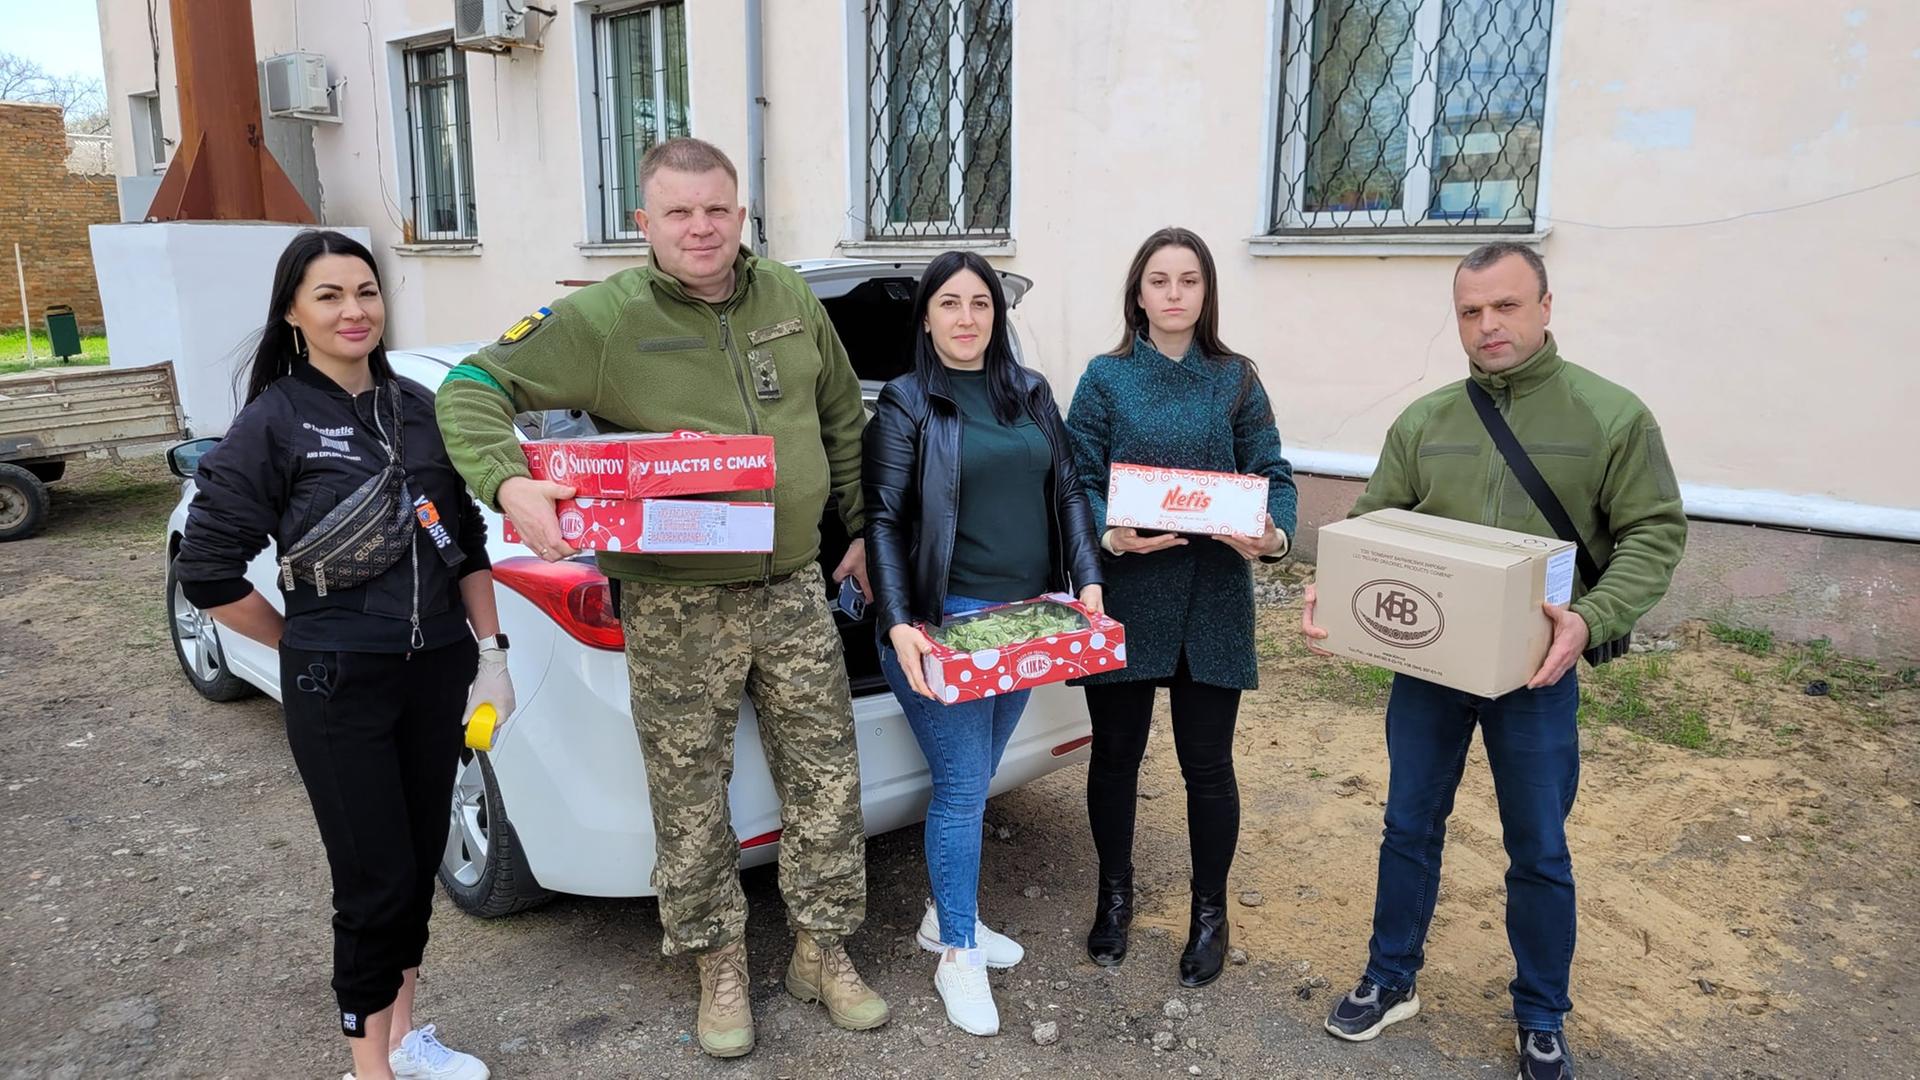 Aid for Irpin from the Bilhorod-Dnistrovskyi Community.